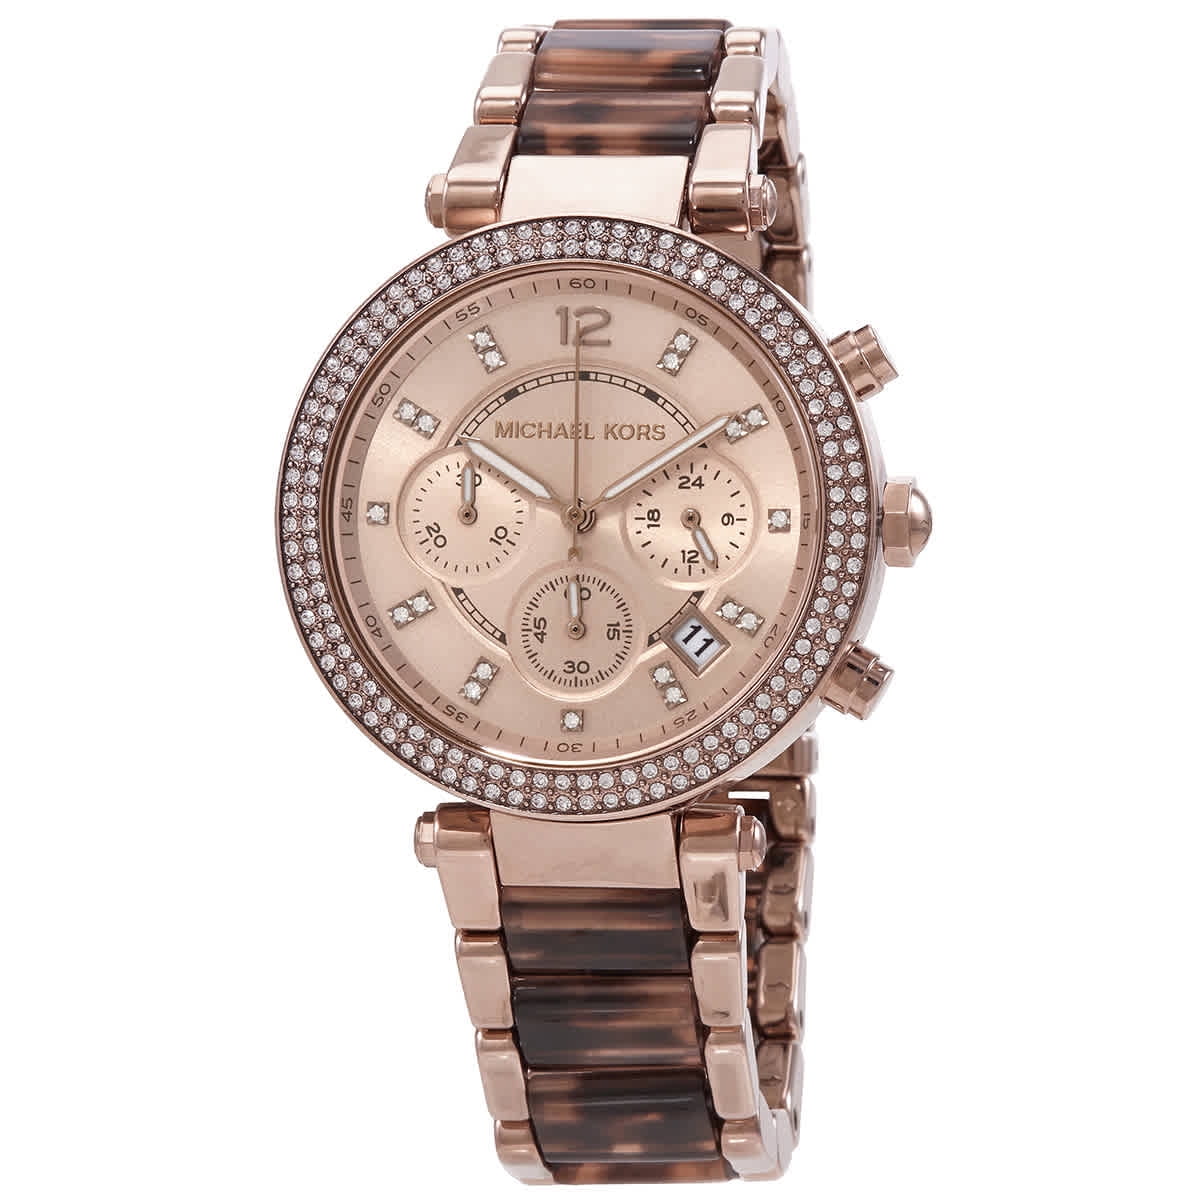 MICHAEL KORS Women's Brown Ivy Quilted Solid Logo Hardware Double